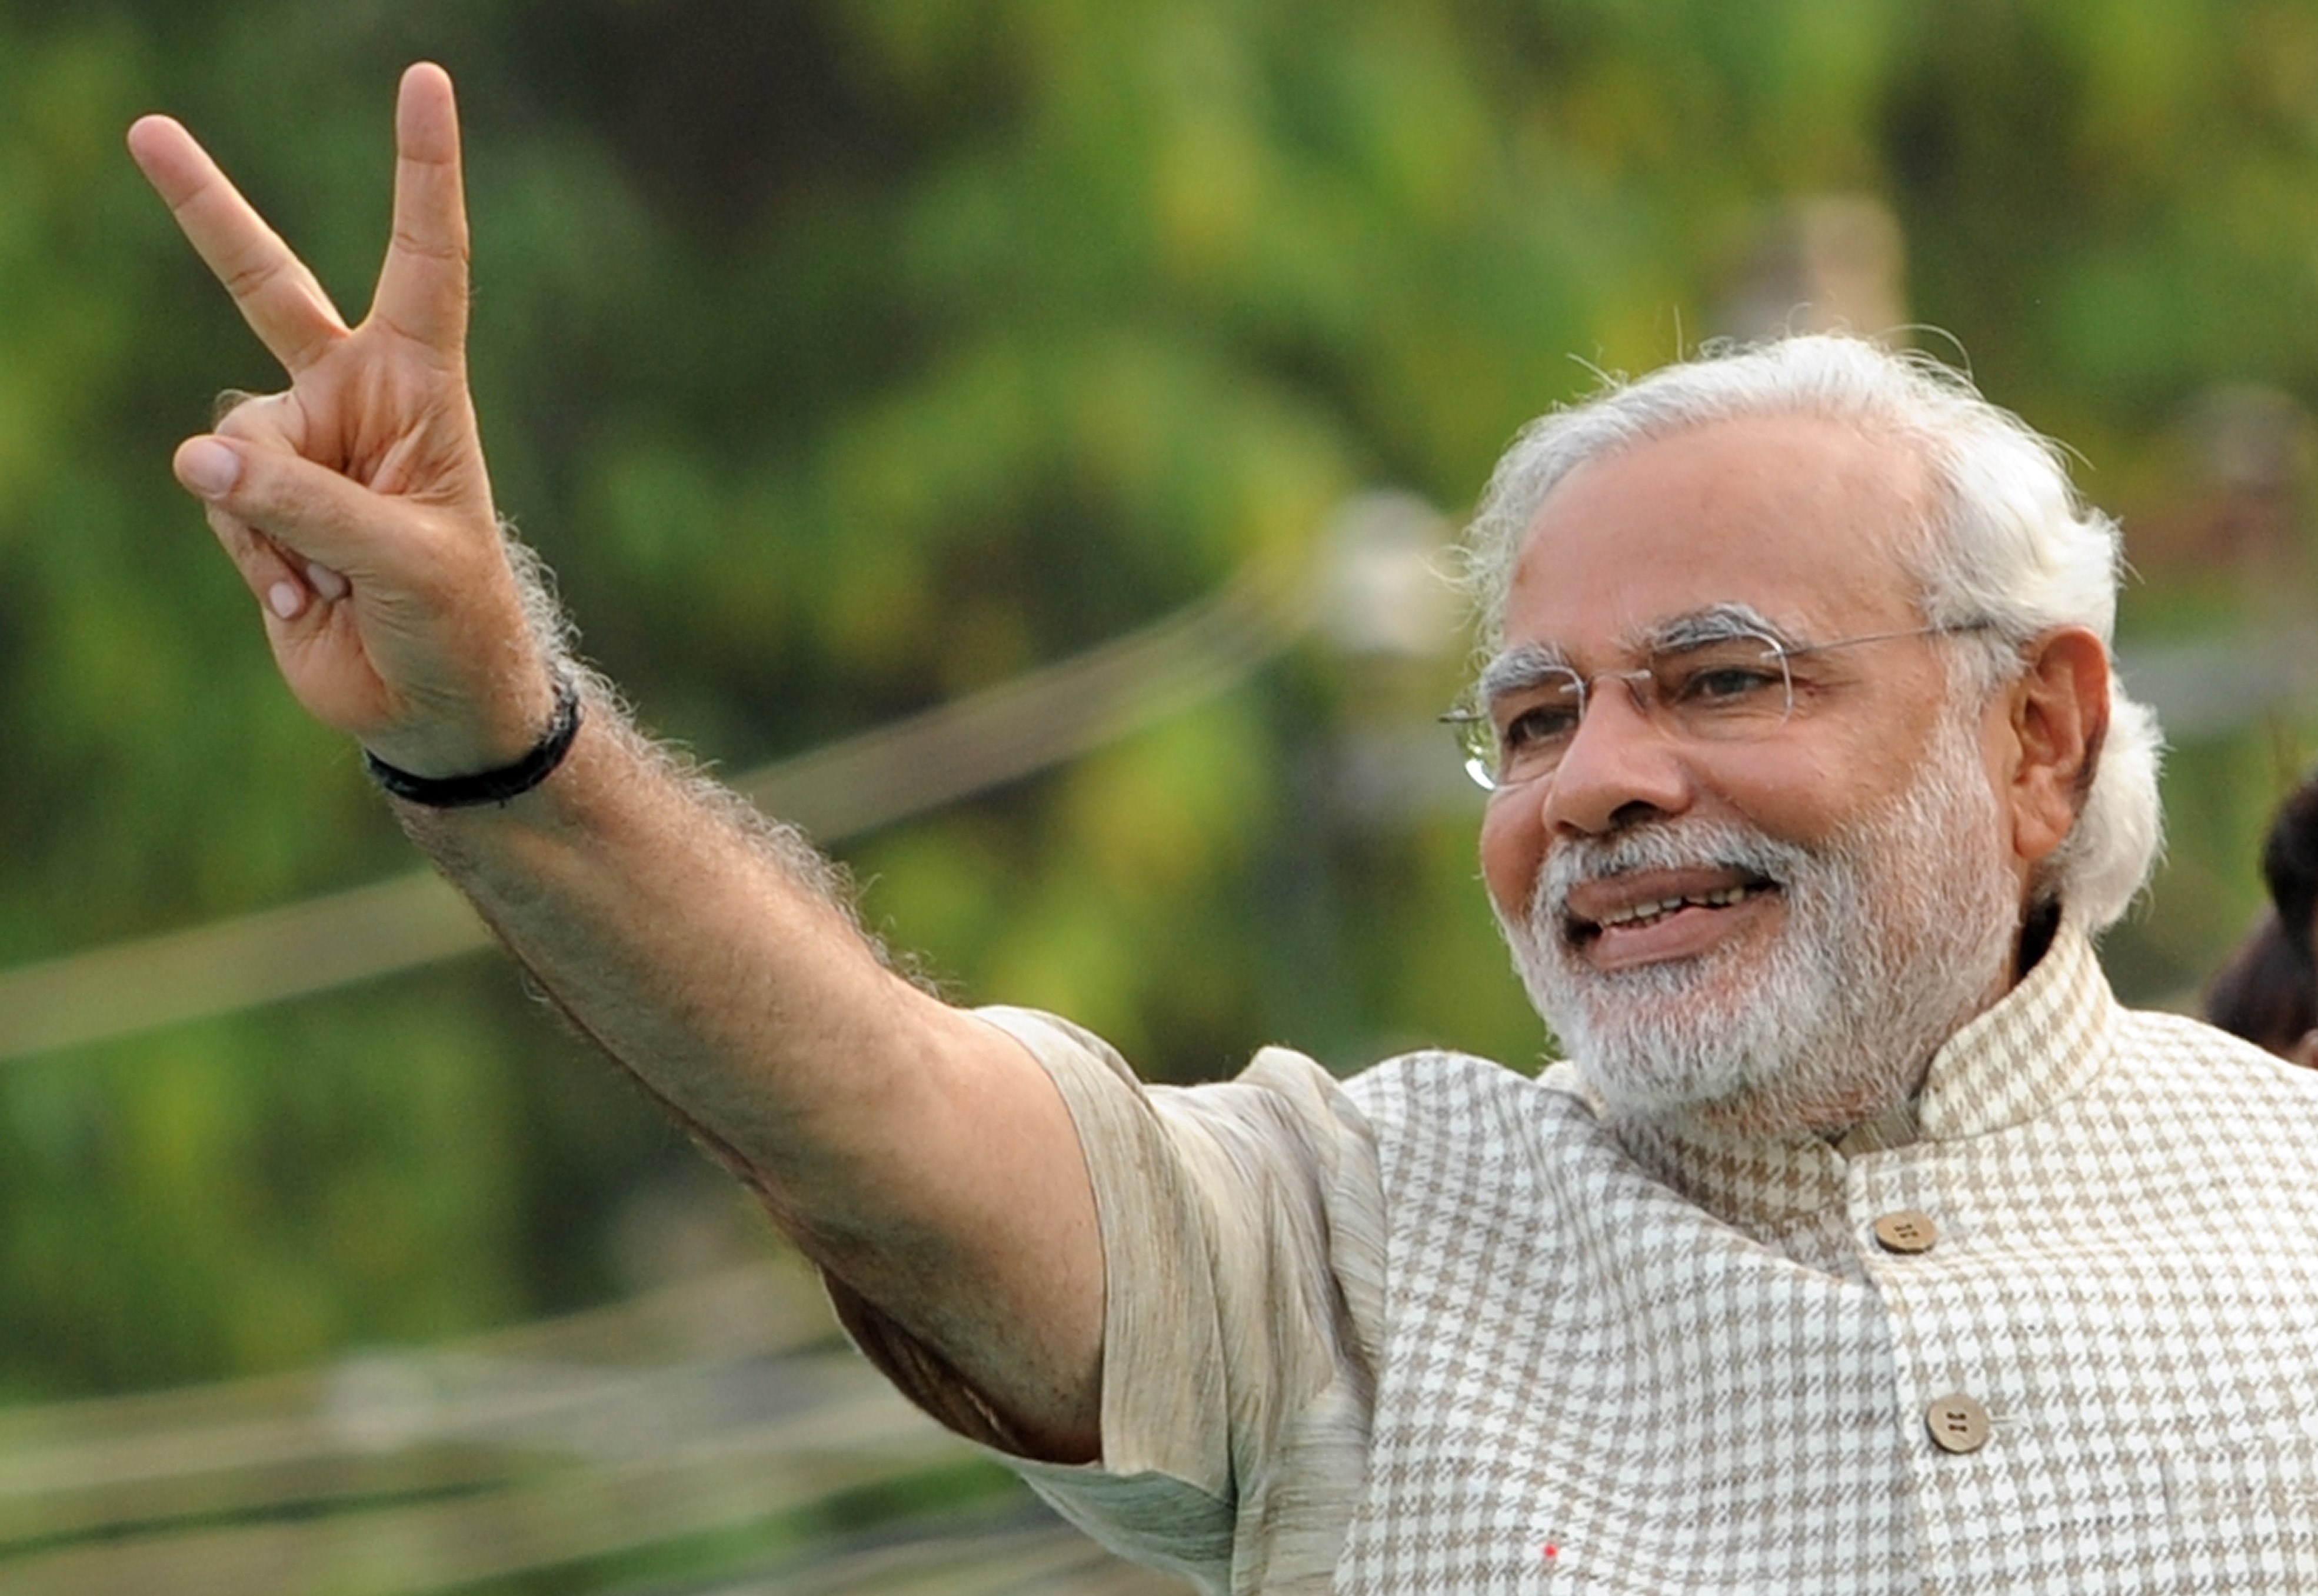 Chief Minister of western Gujarat state and main opposition Bharatiya Janata Party (BJP) prime ministerial candidate Narendra Modi flashes the victory sign as he arrives at a public rally after his victory in Vadodara on May 16, 2014.